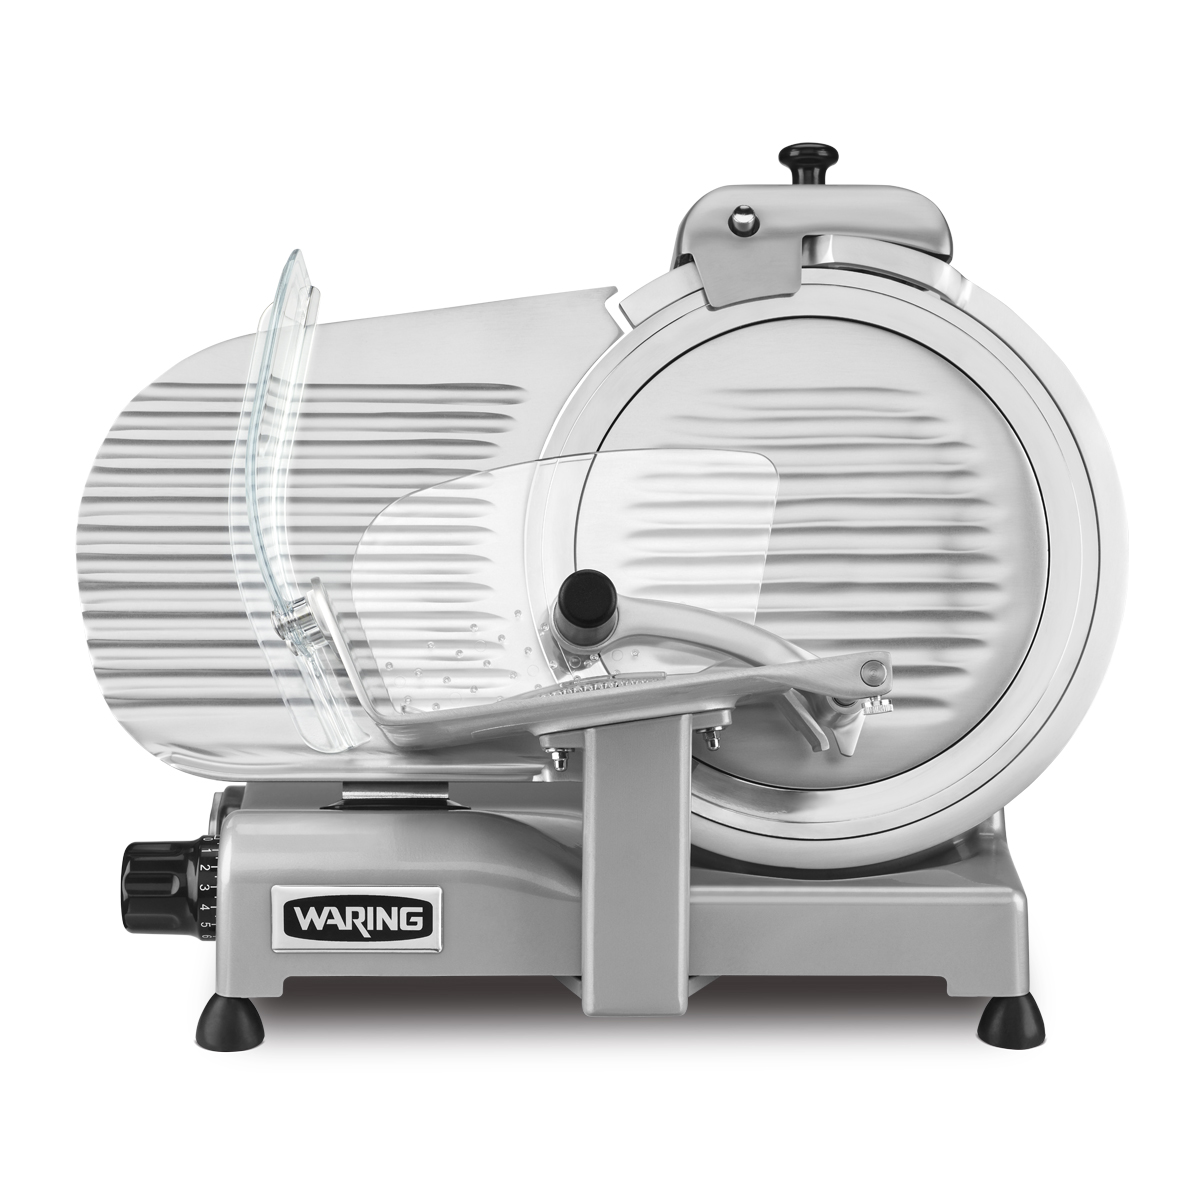 https://www.waringcommercialproducts.com/files/products/wcs300sv-professional-food-slicer-inset-2-1200x1200.jpg